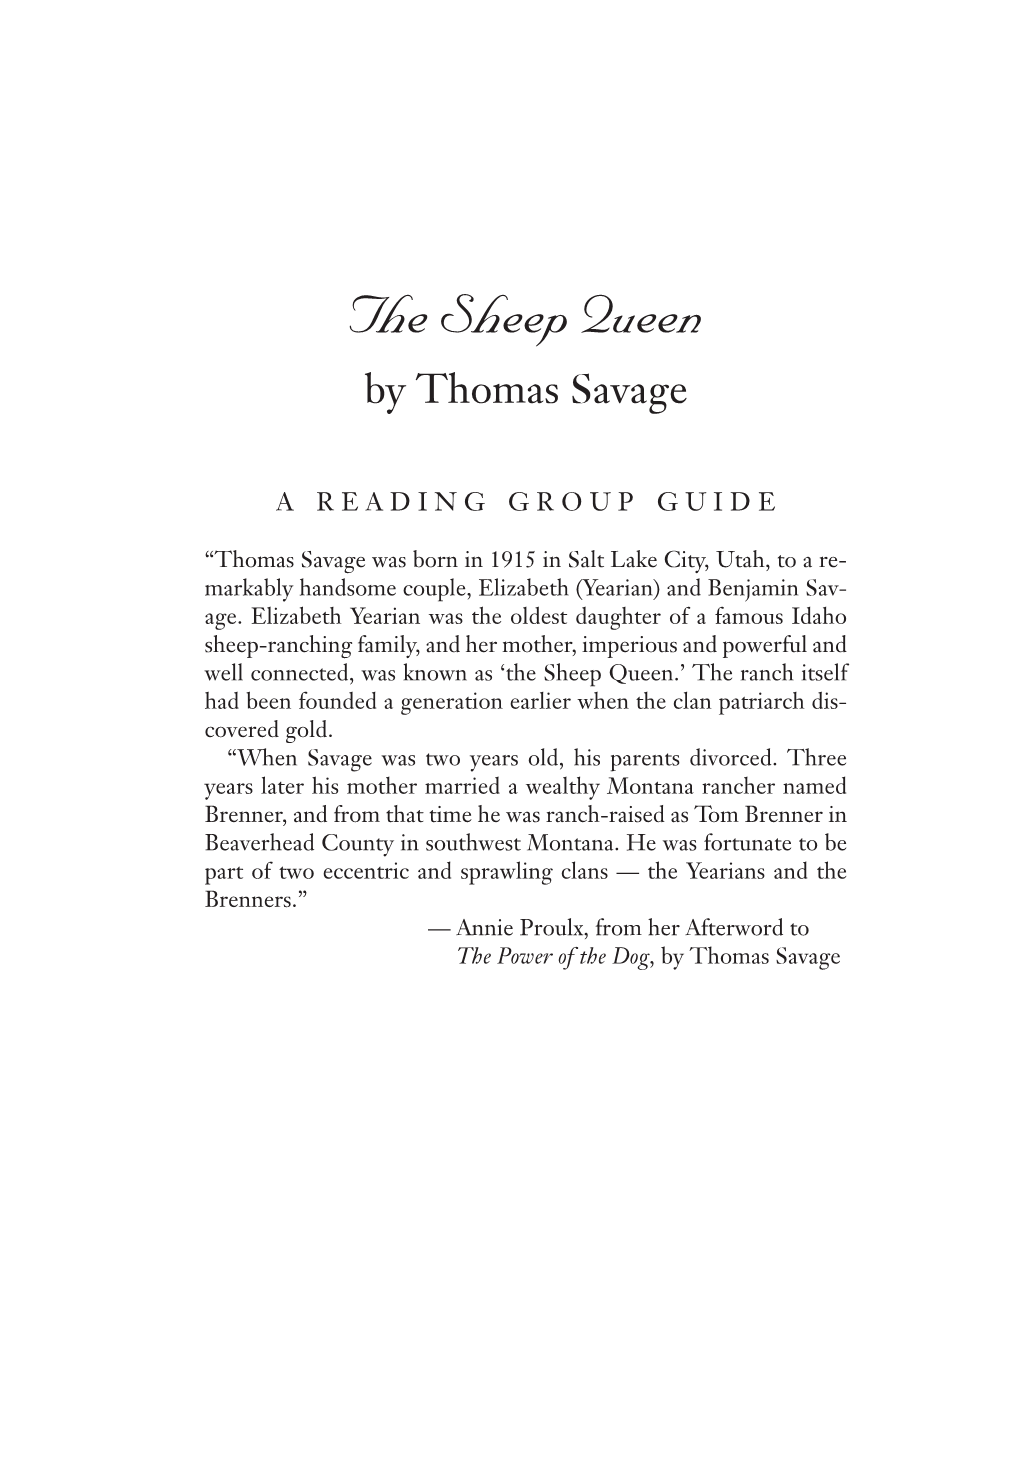 The Sheep Queen by Thomas Savage